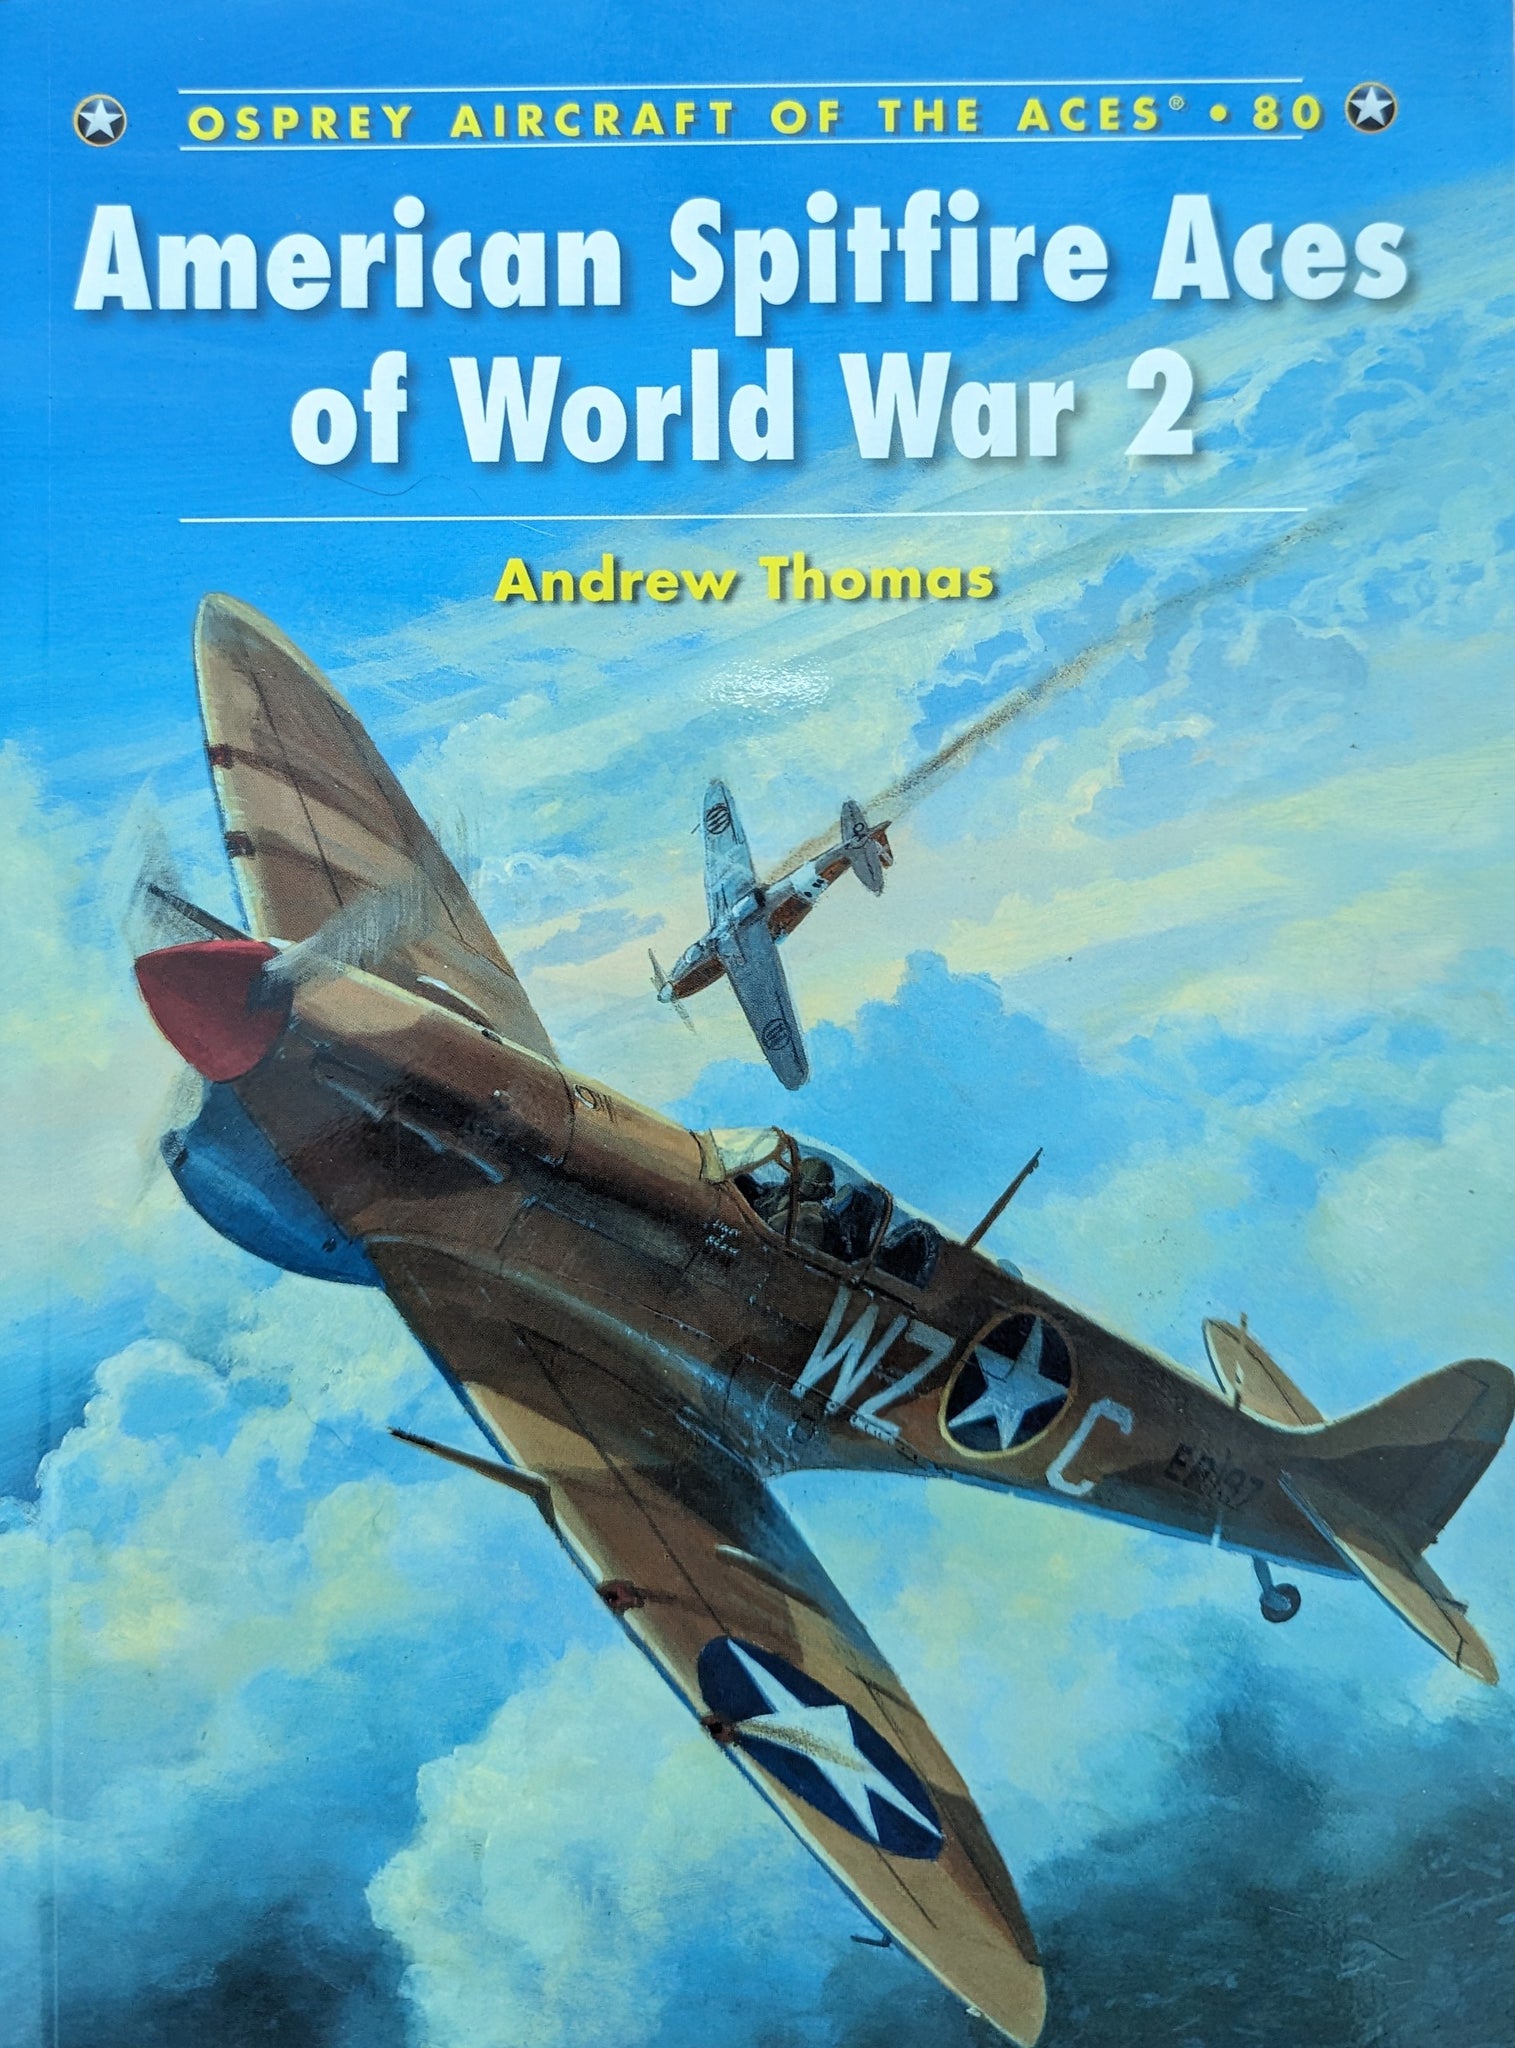 AMERICAN SPITFIRE ACES OF WORLD WAR 2 (Osprey Aircraft of the Aces No 80)